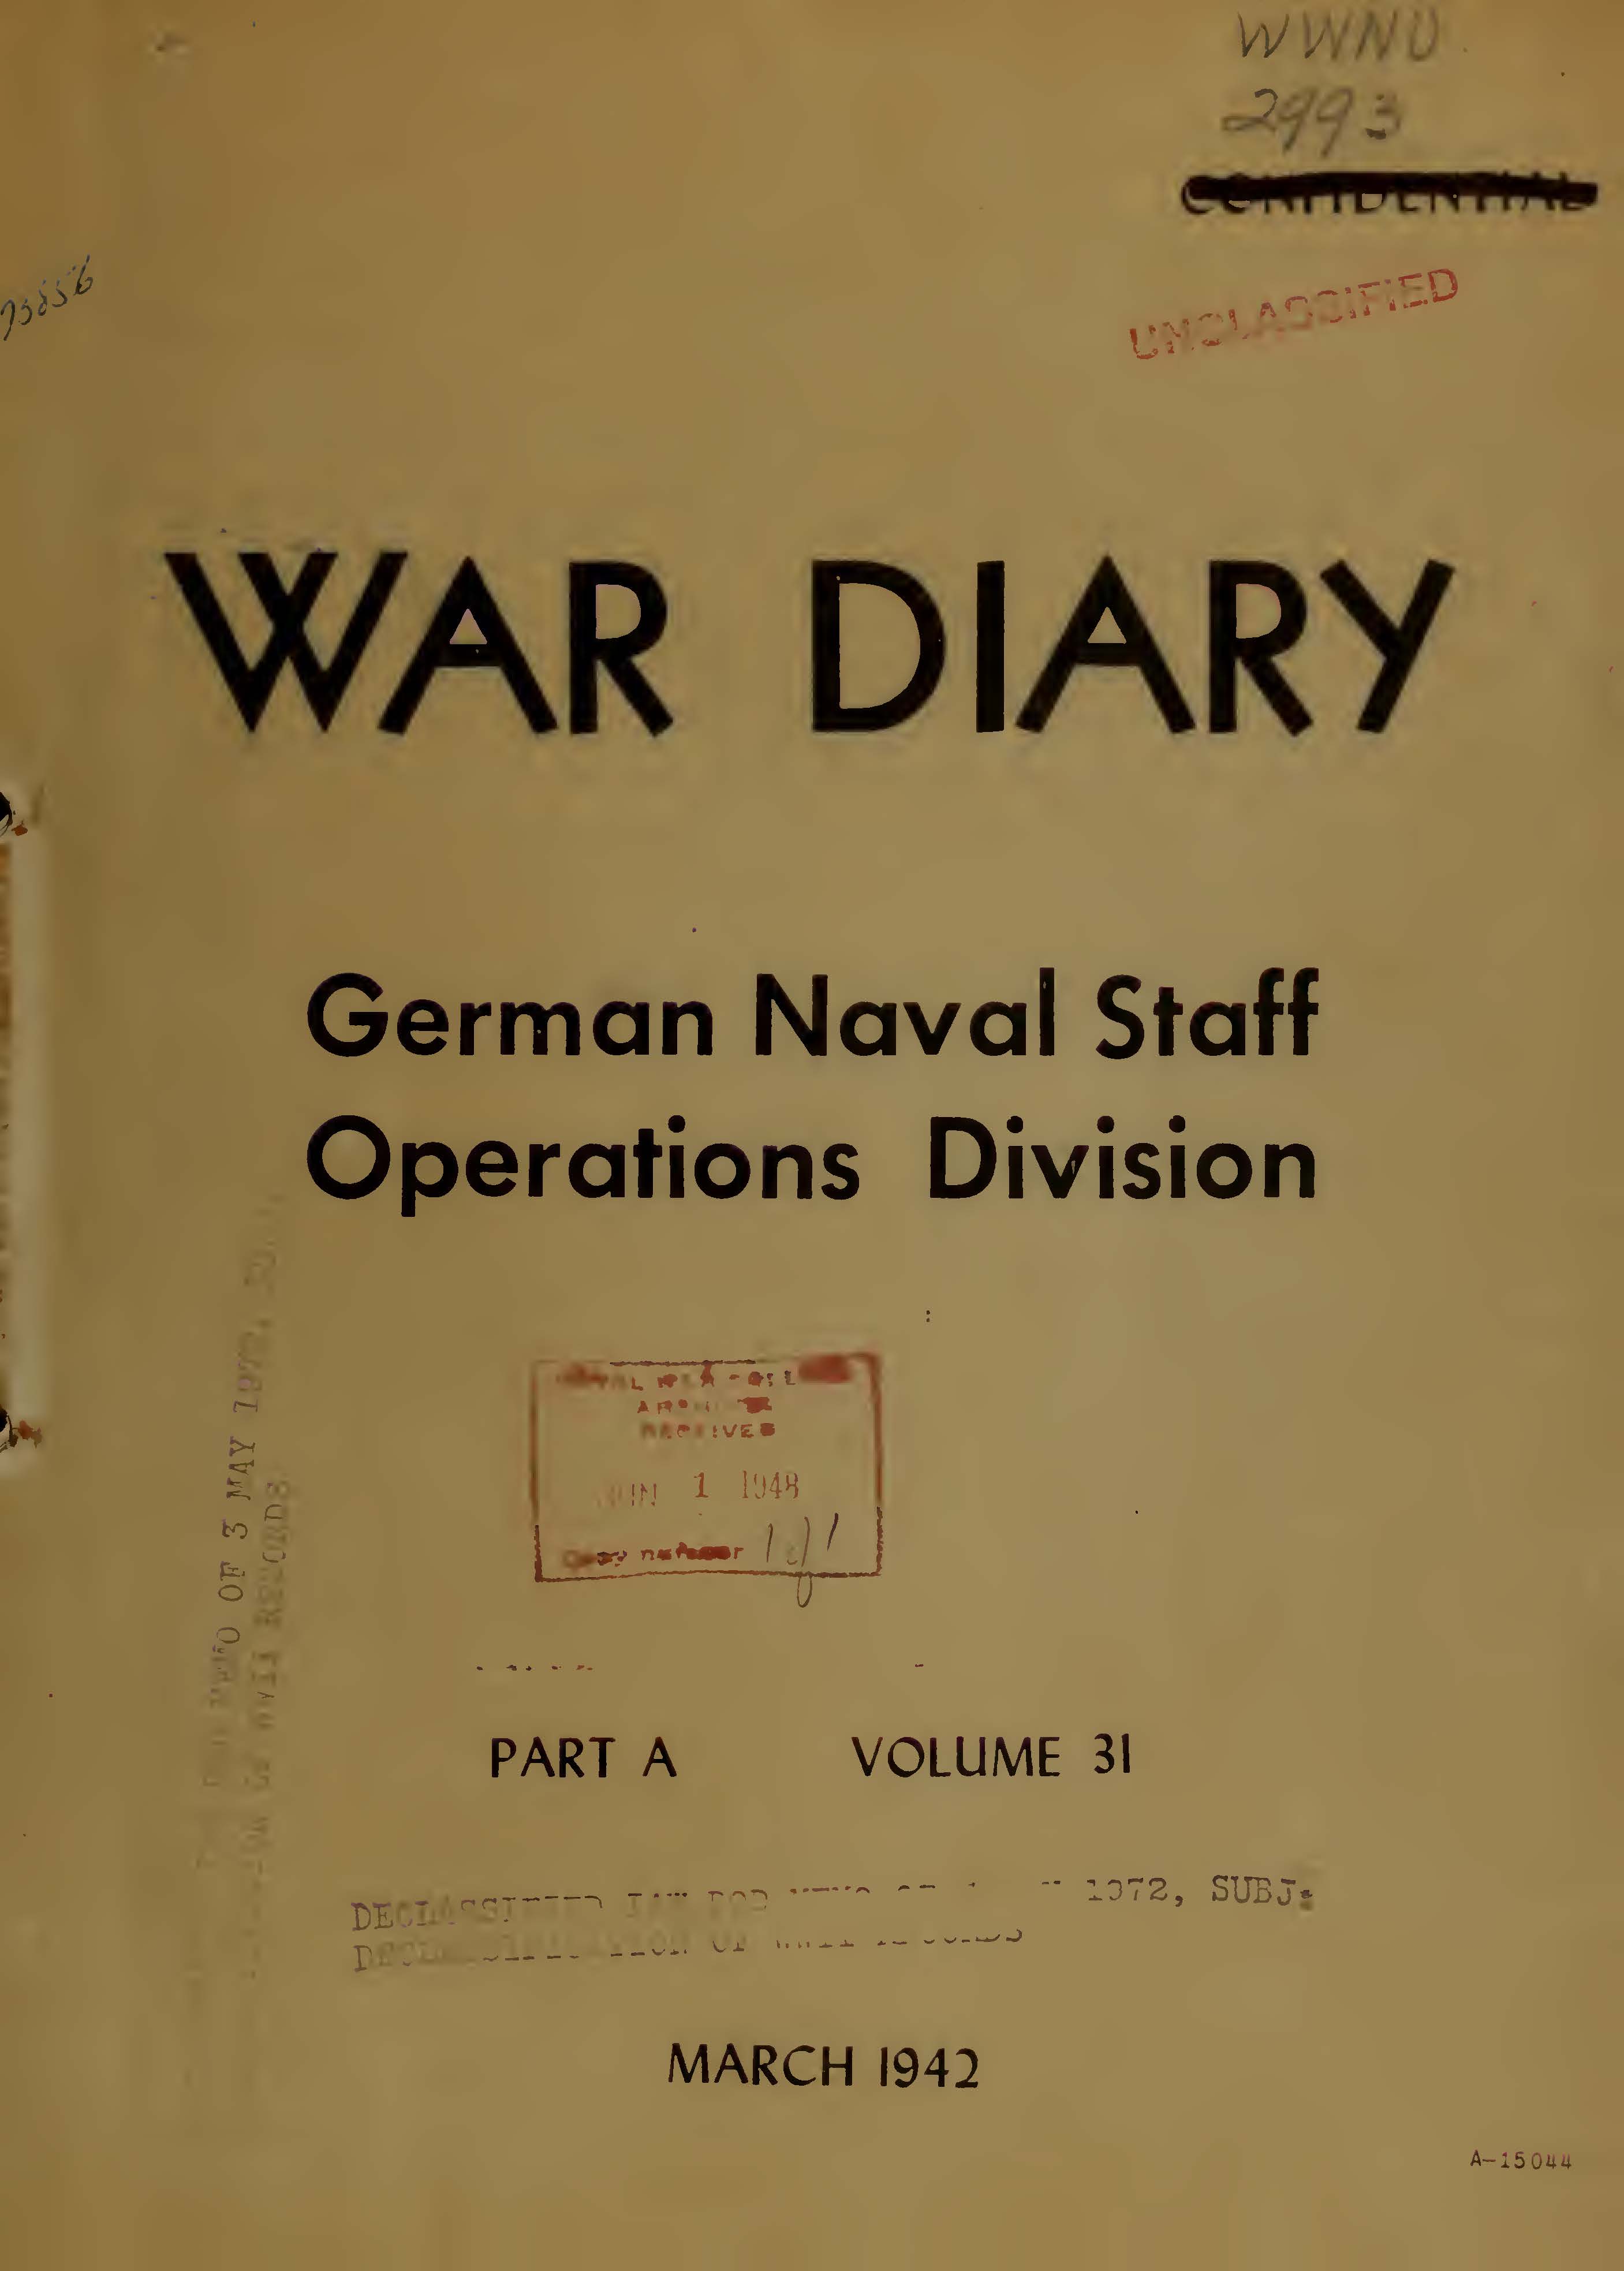 War Diary of German Naval Staff (Operations Division) Part A, Volume 31, March 1942